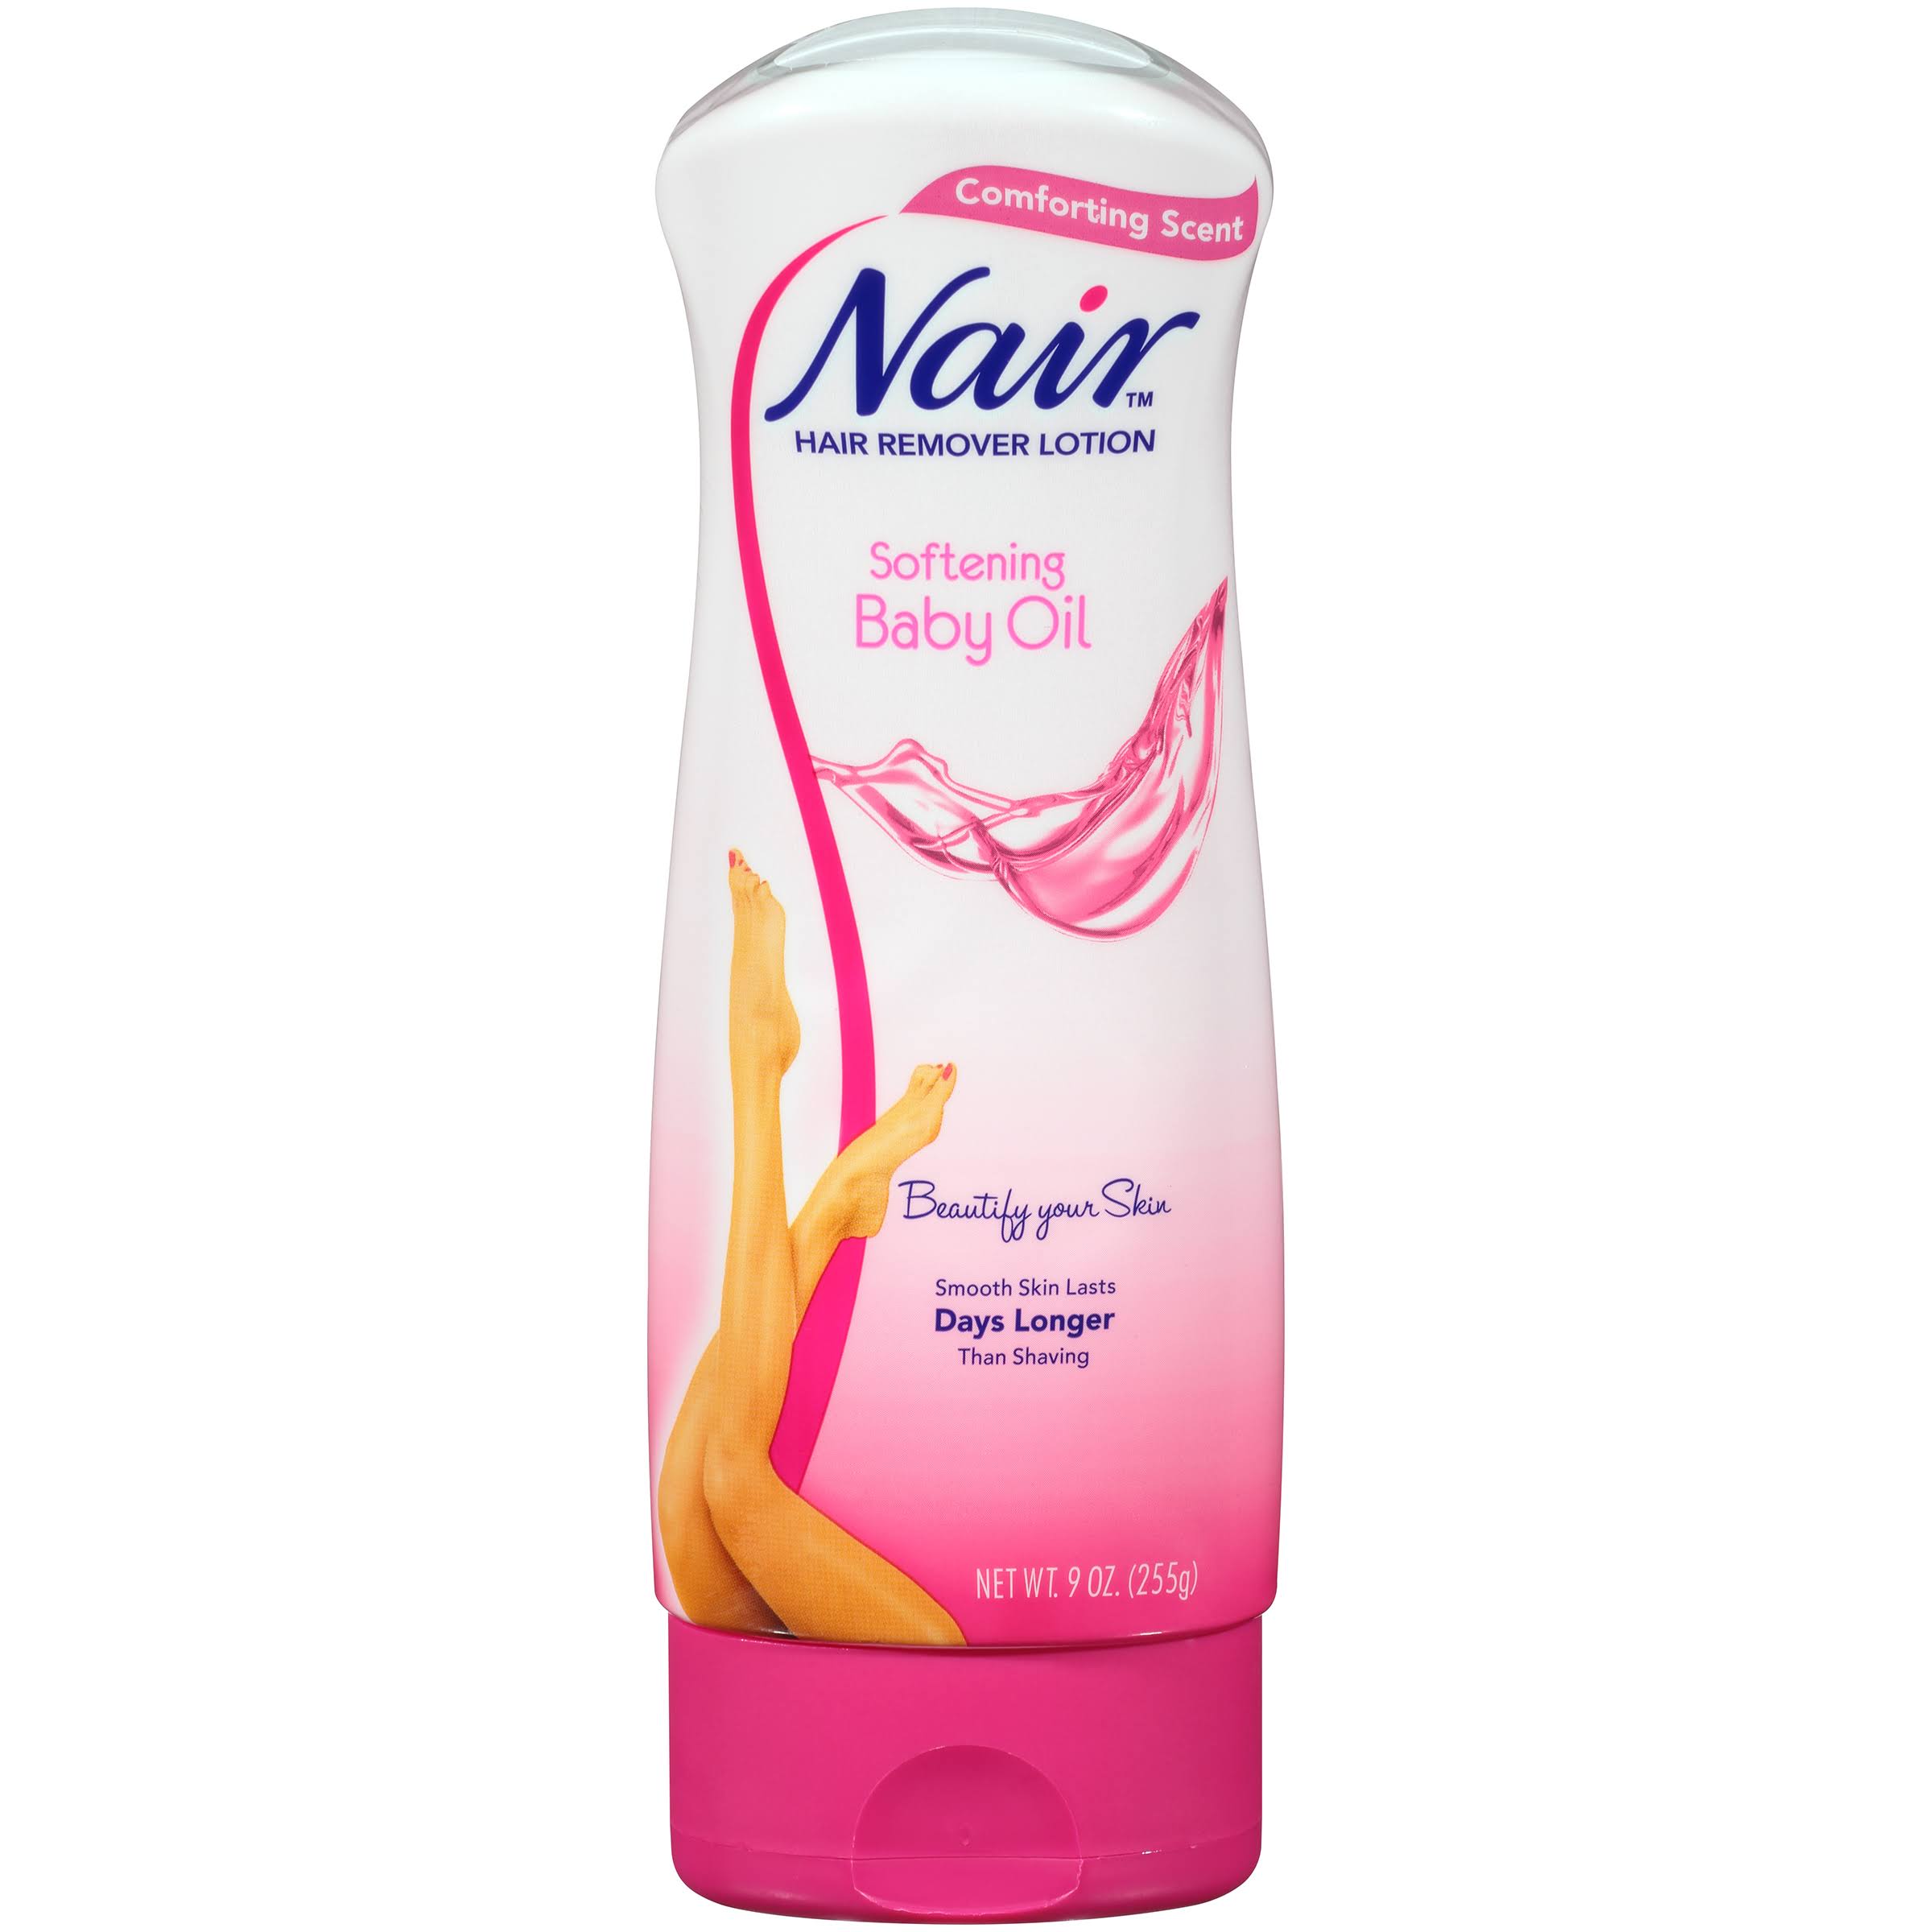 Nair Softening Baby Oil Hair Remover Lotion - 9oz